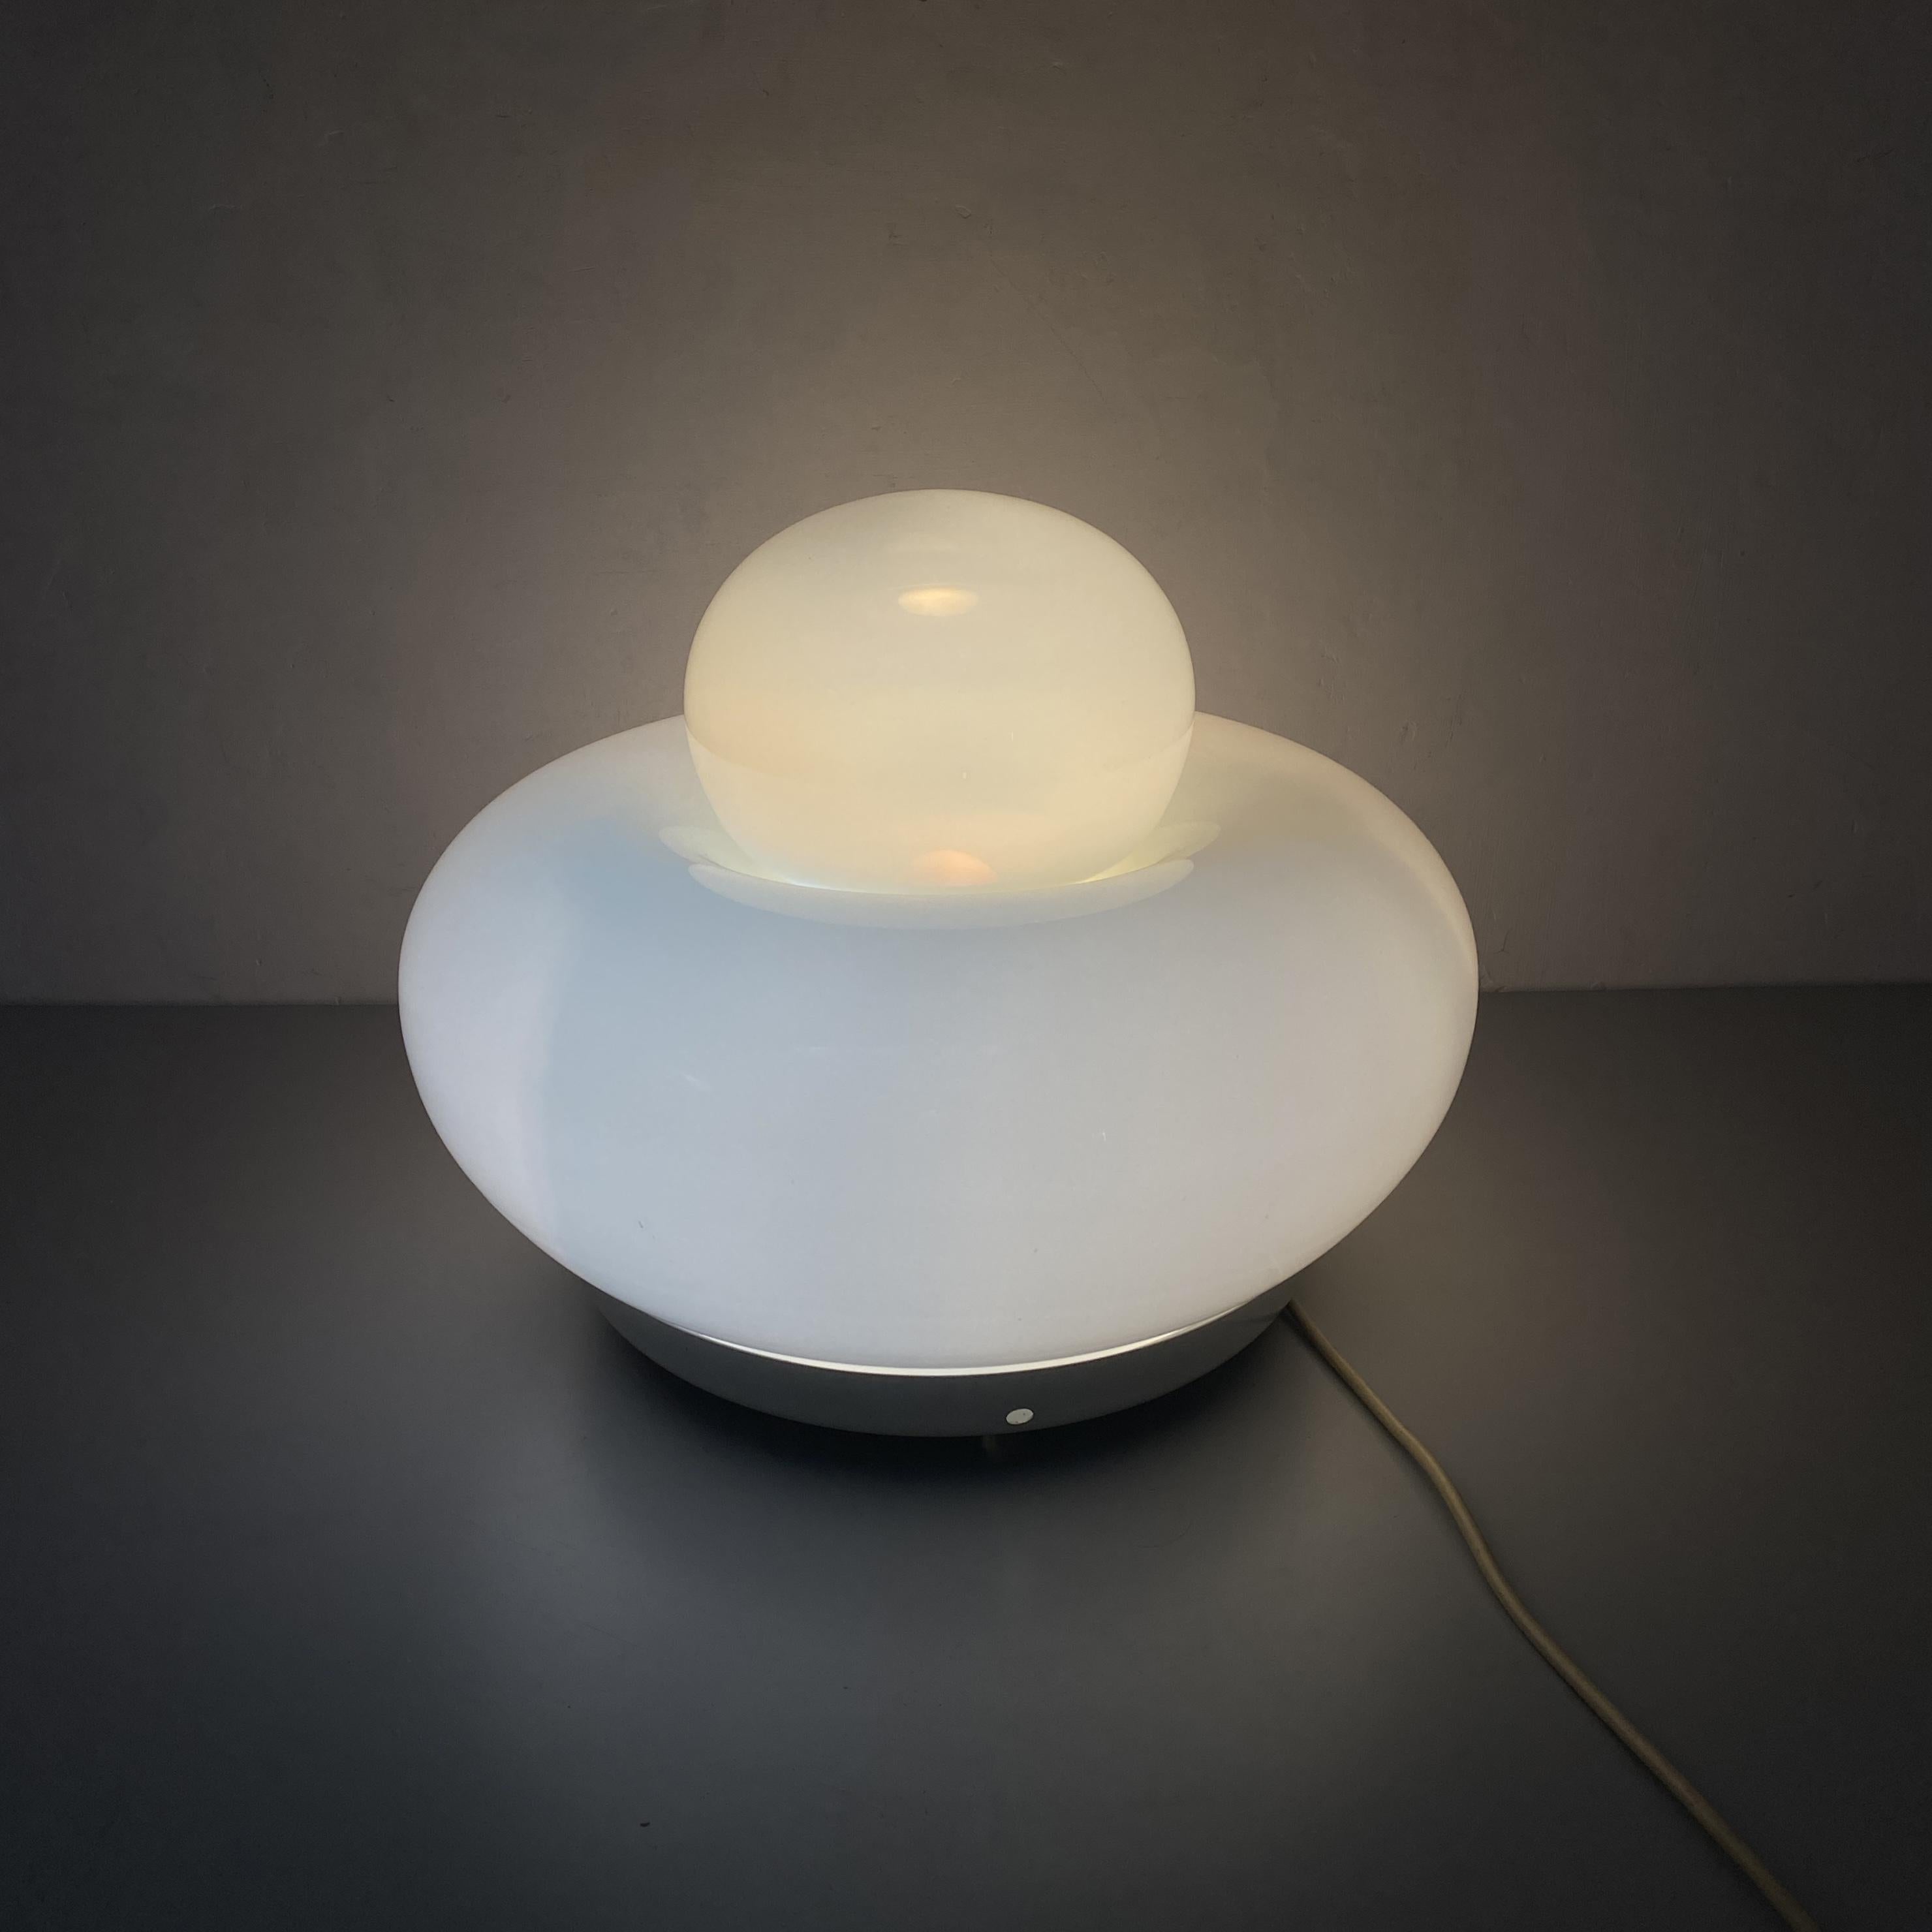 Italian Modern Electra Table Lamp by Giuliana Gramigna for Artemide, 1968 For Sale 7